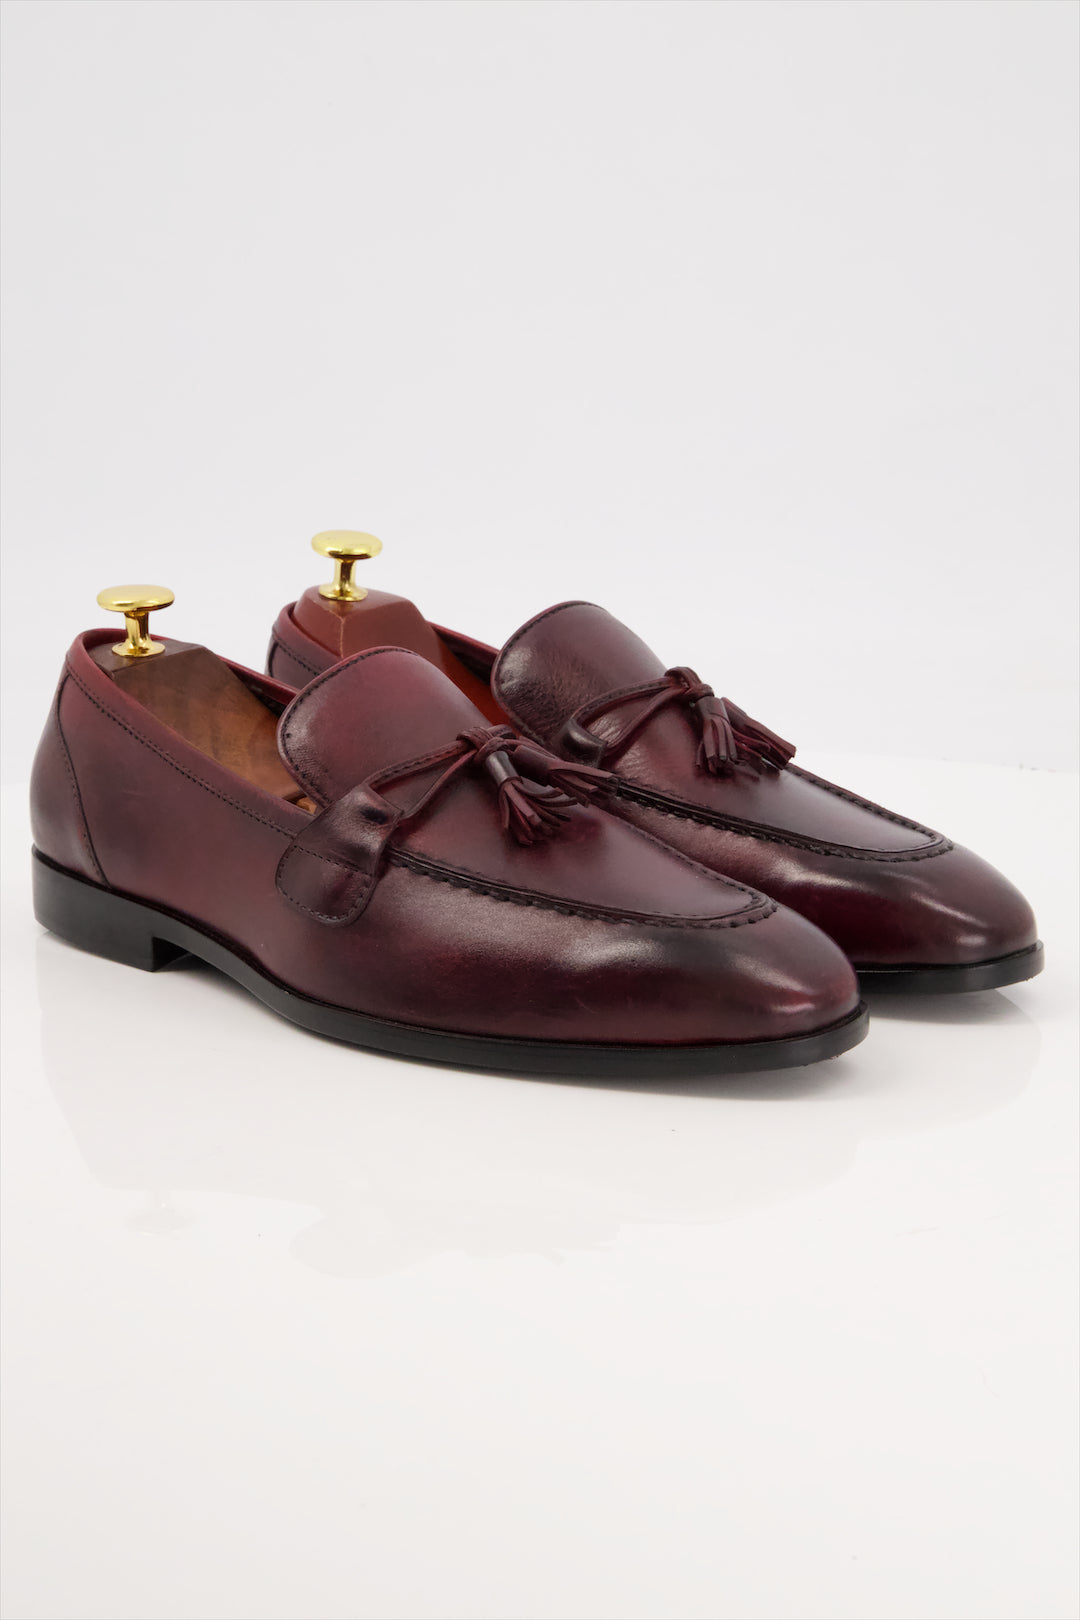 Heritage Tassel Loafers - Handcrafted Burgundy Leather Slip-On Shoes